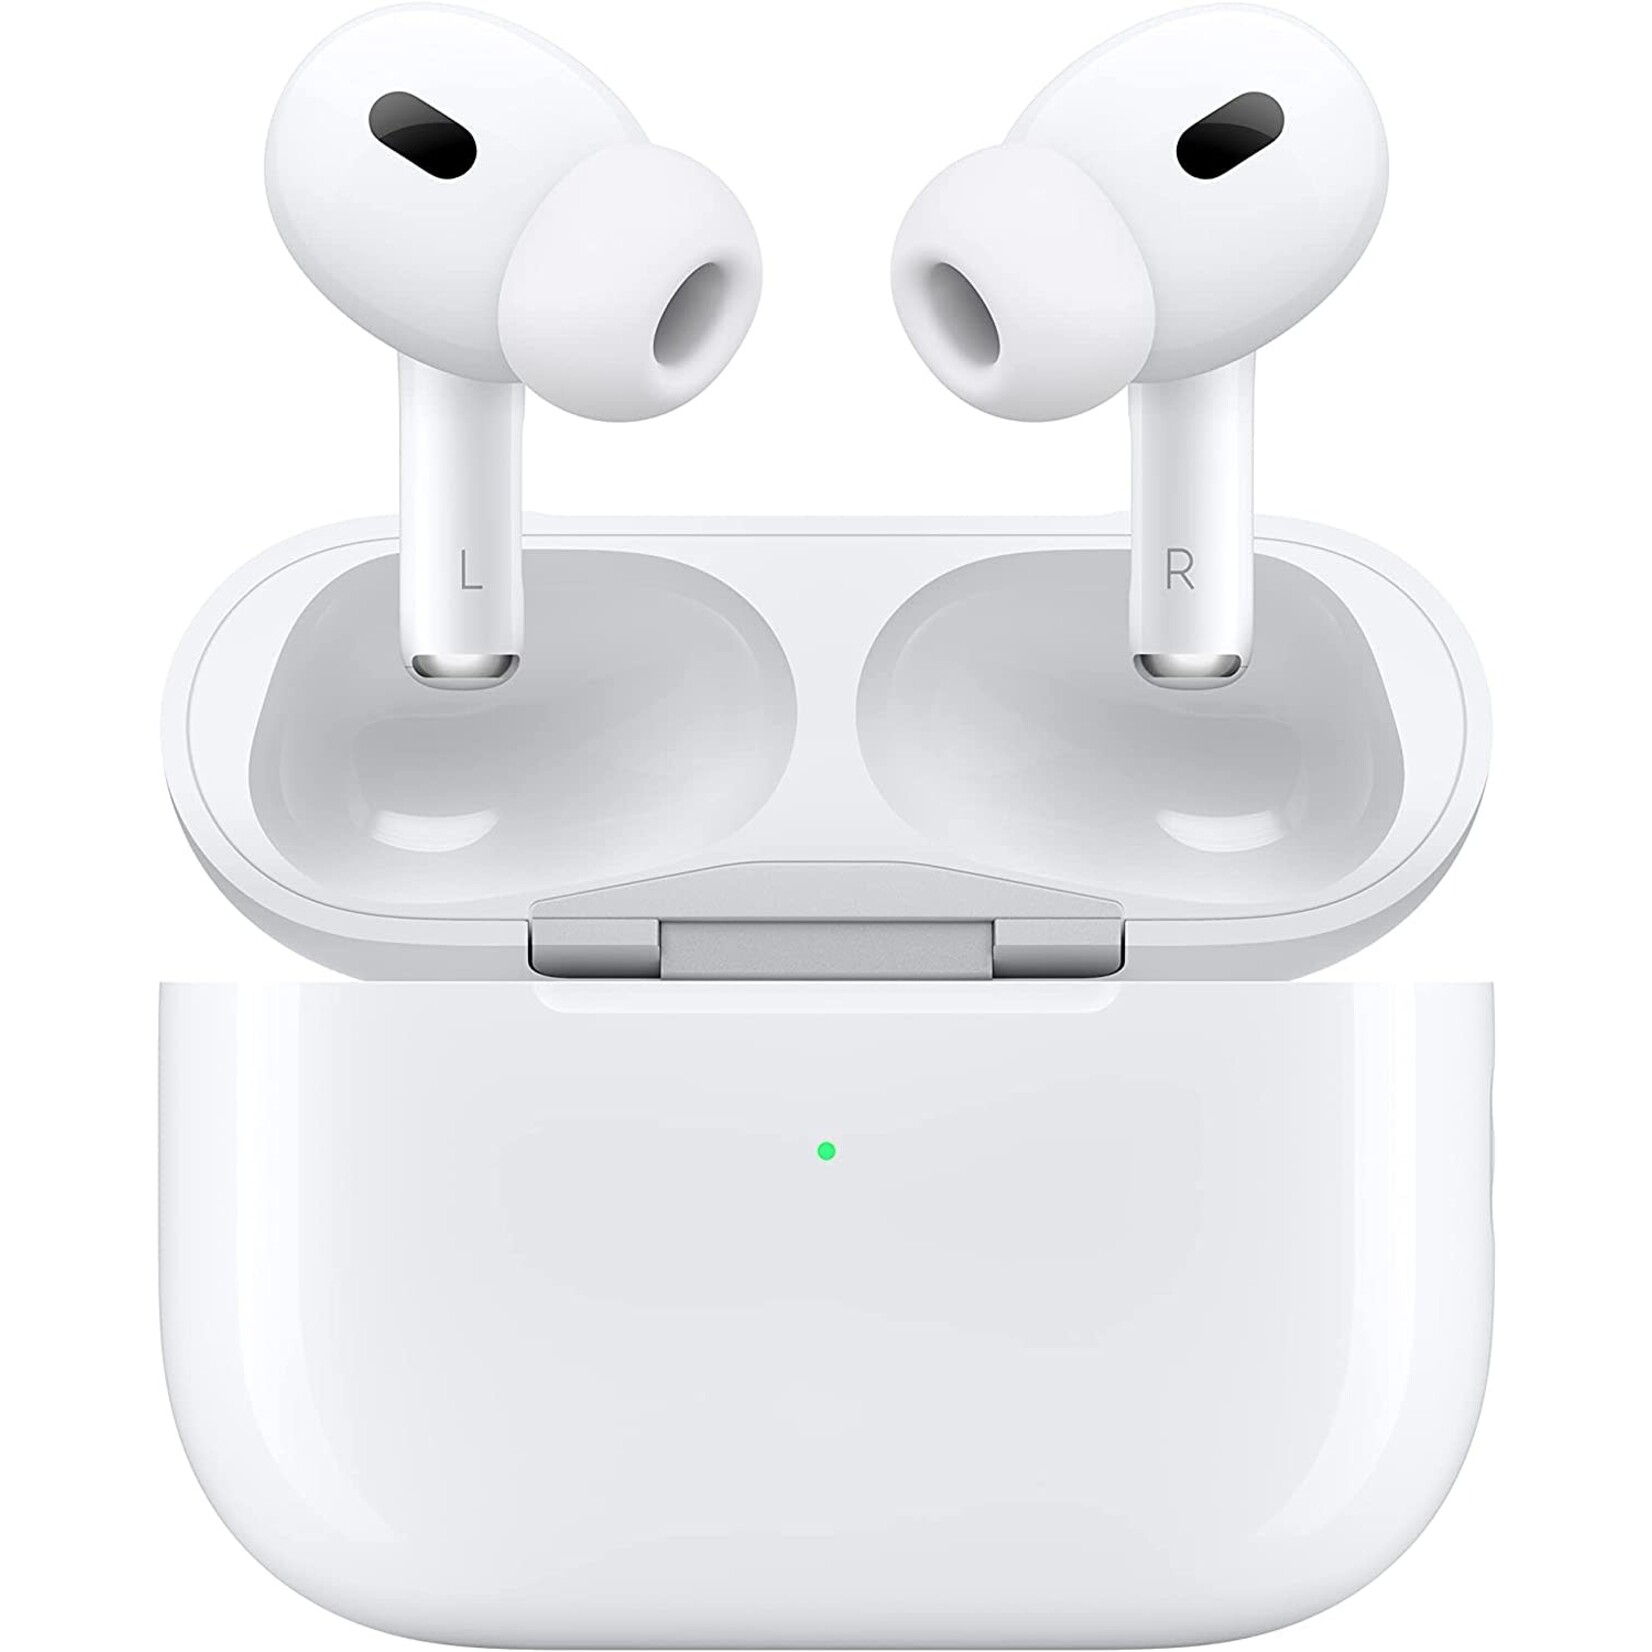 Apple Apple AirPods Pro (2nd Generation) Wireless Earbuds